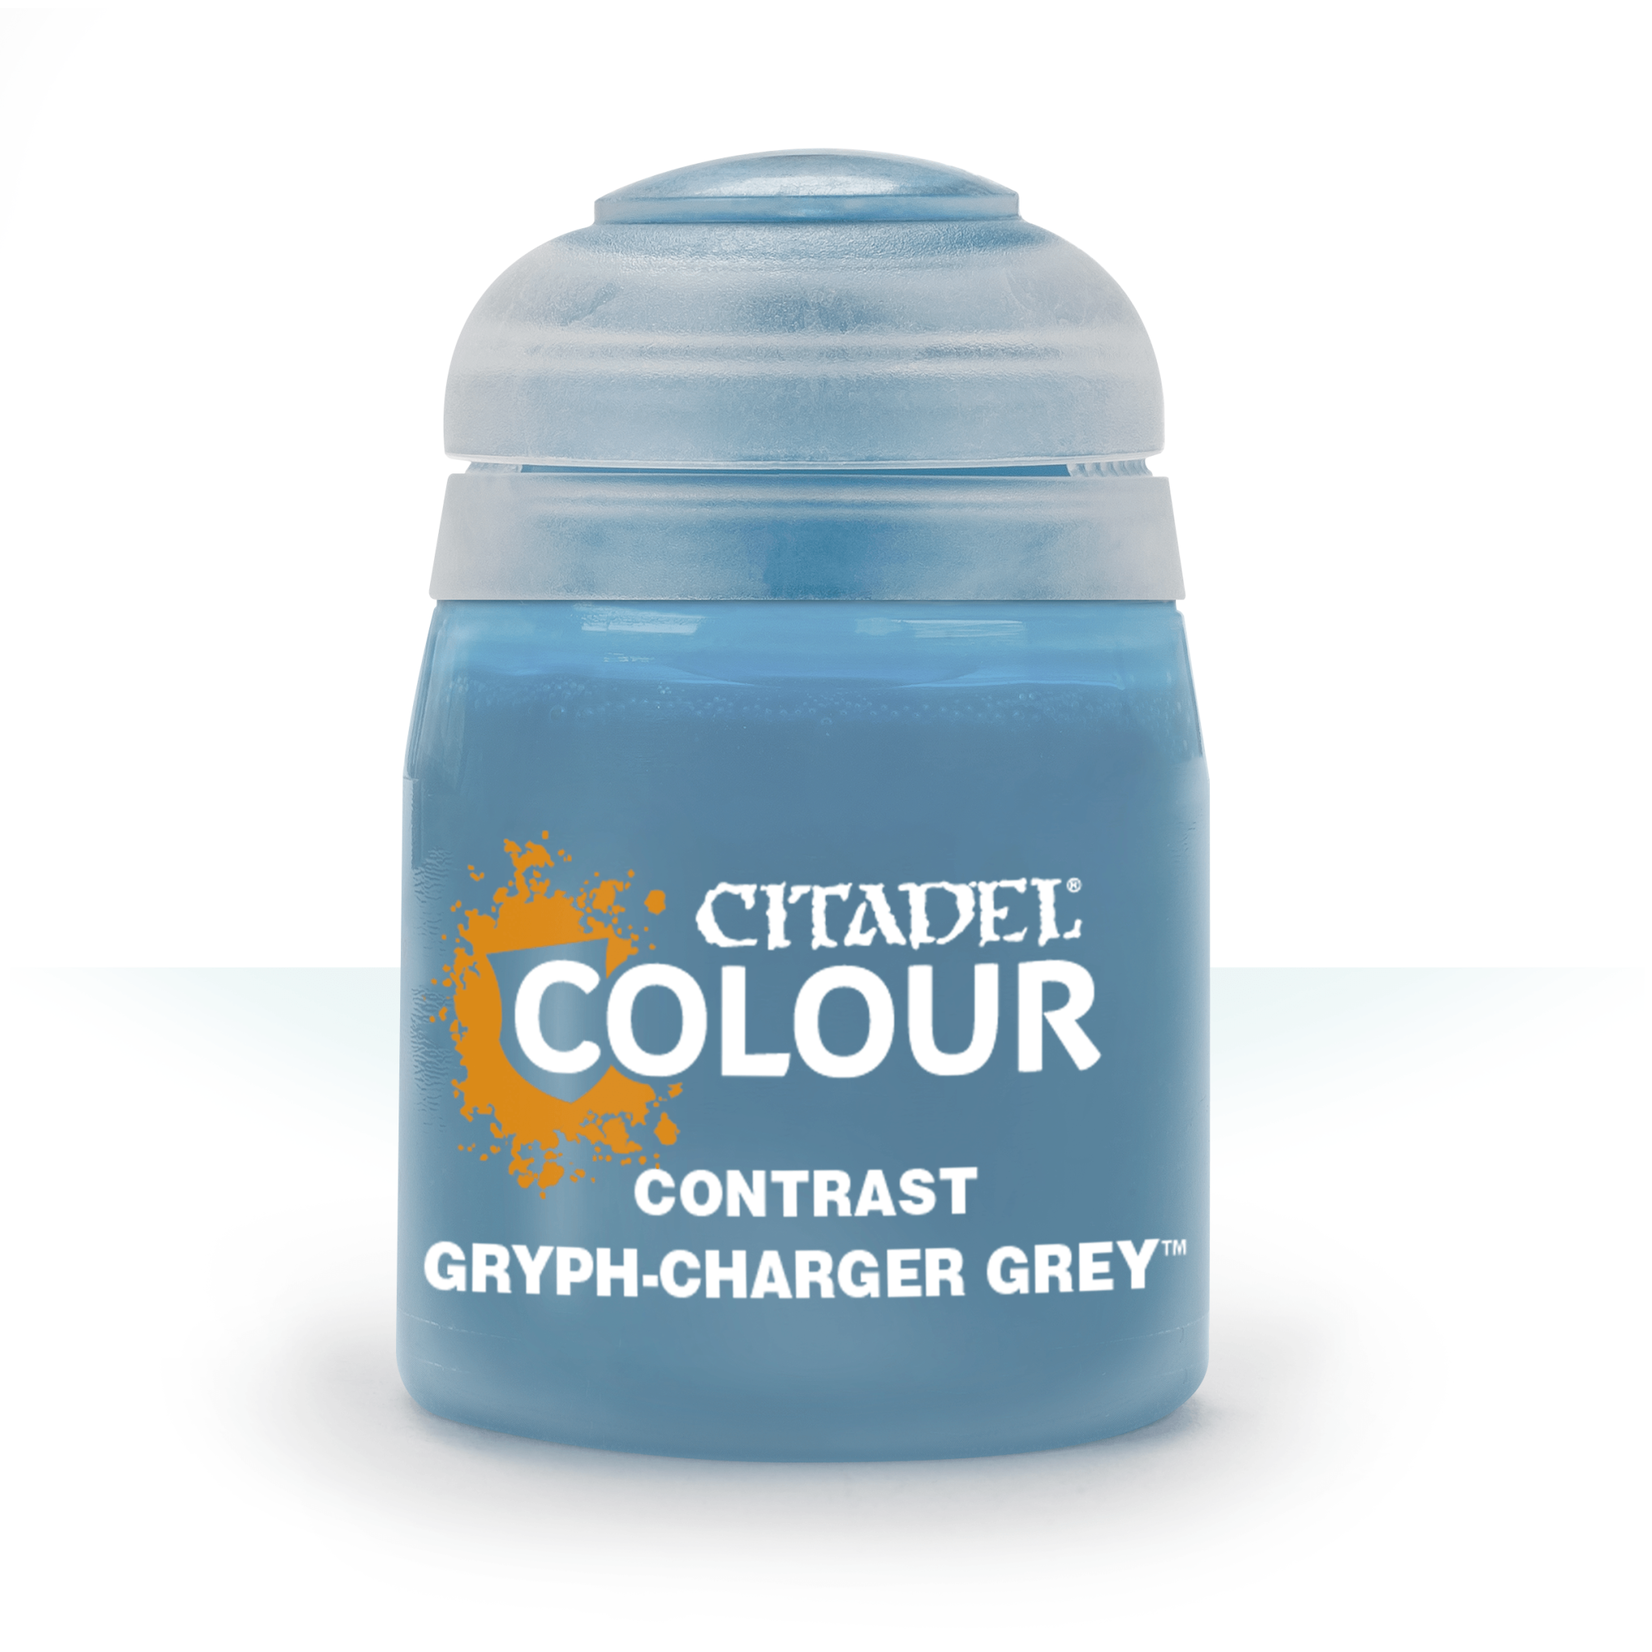 Citadel Gryph-charger Grey (Contrast 18ml)